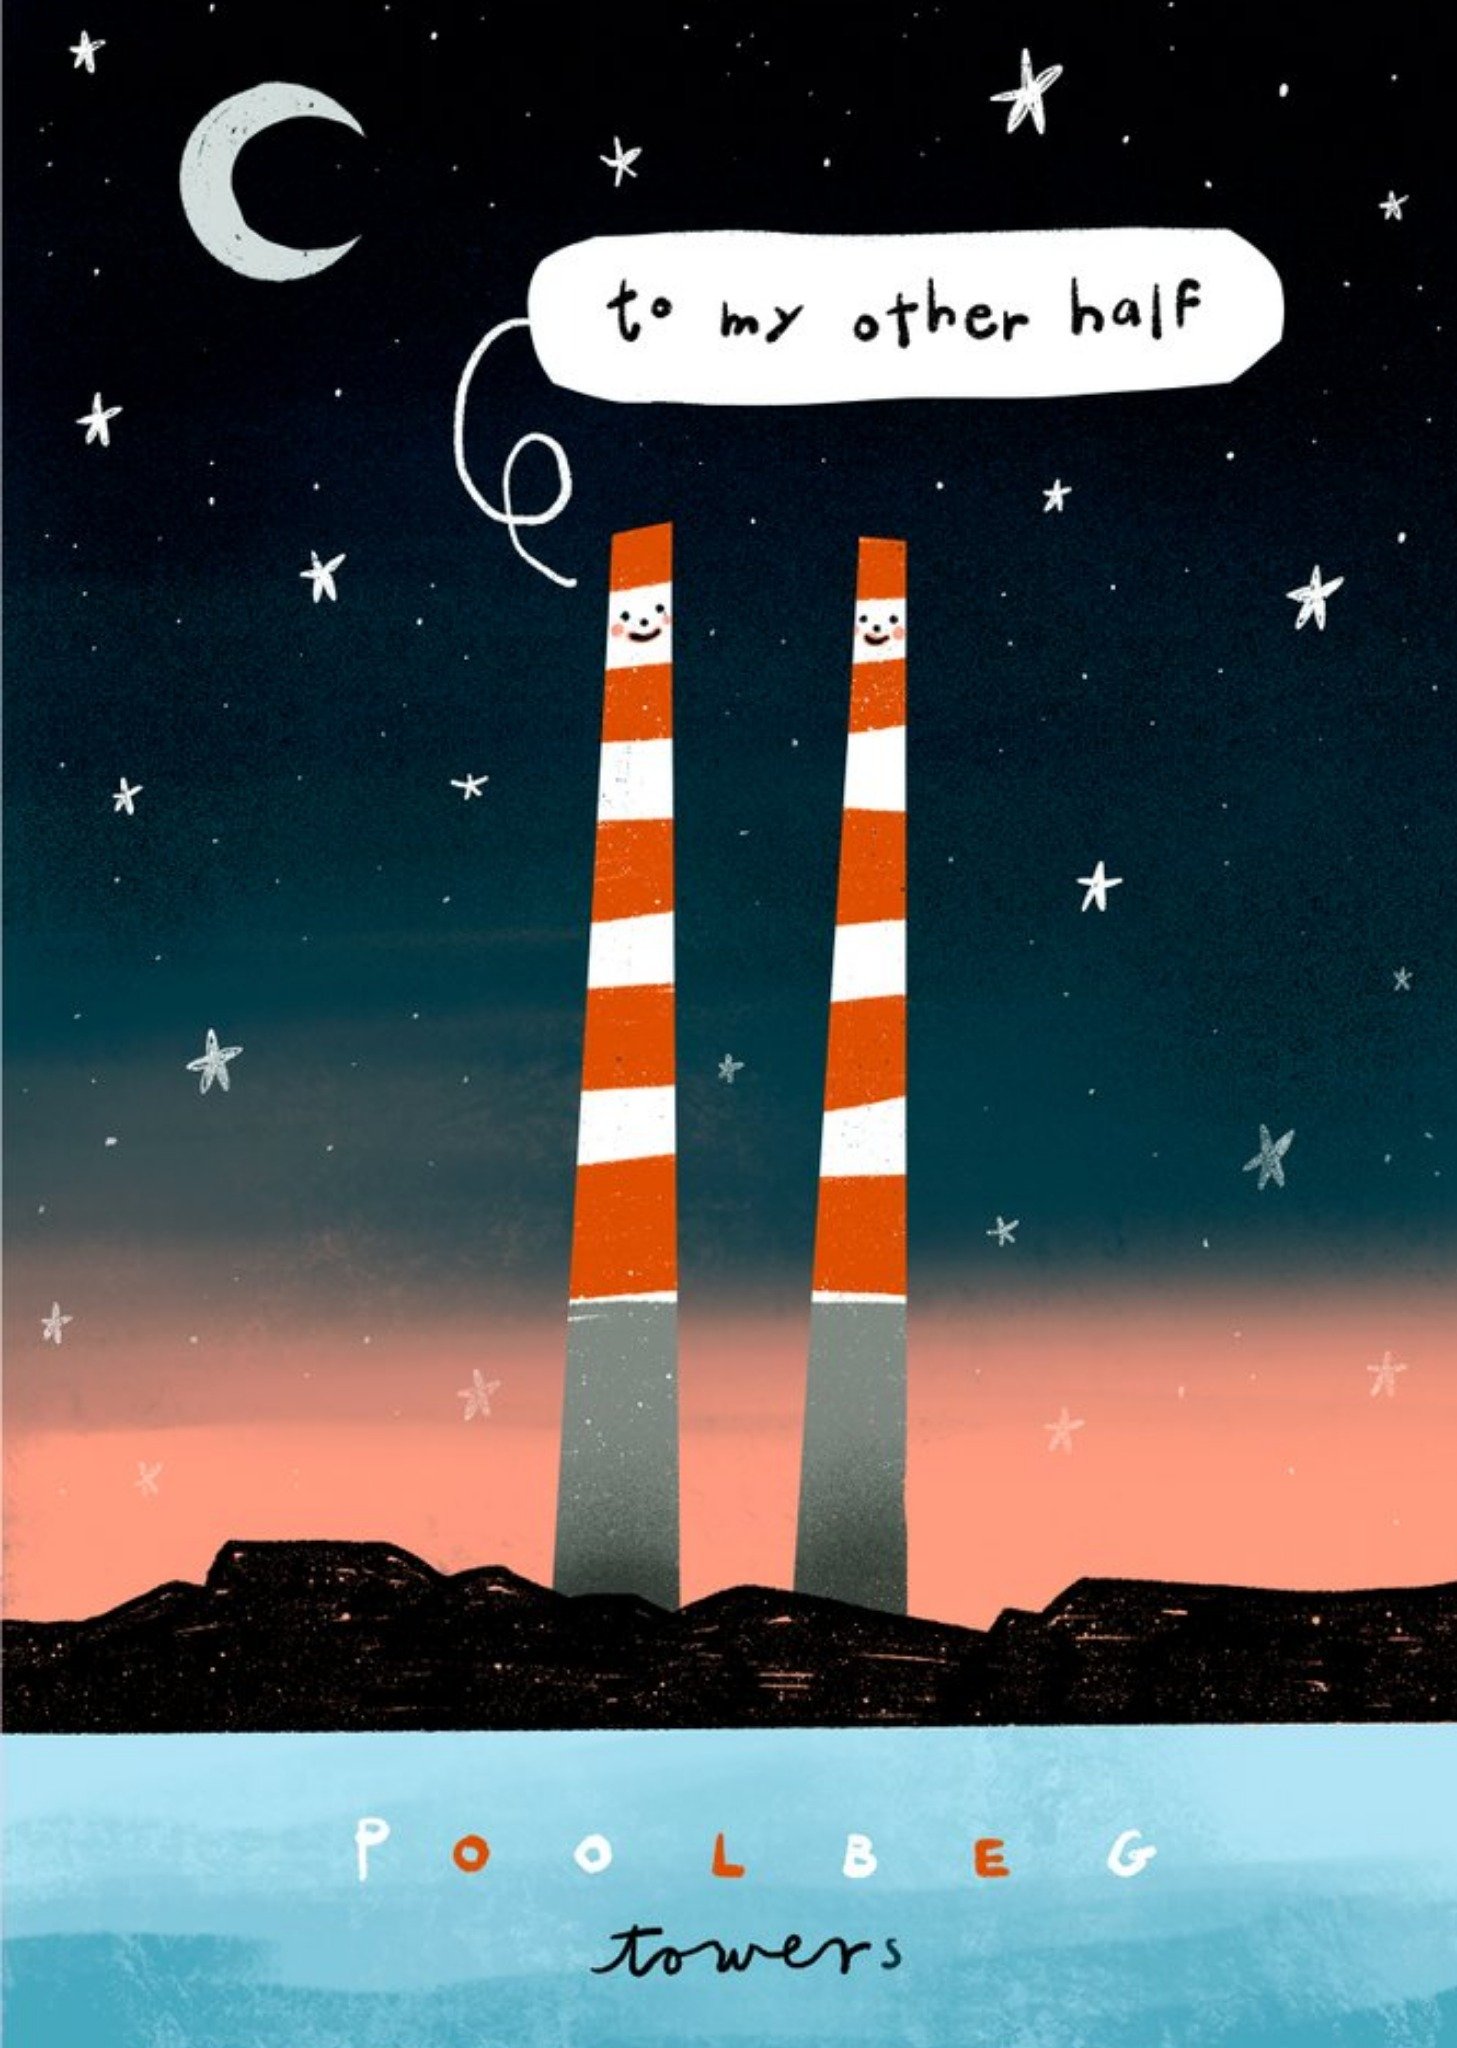 Moonpig Illustrated To My Other Half Poolbeg Towers Just To Say Card Ecard